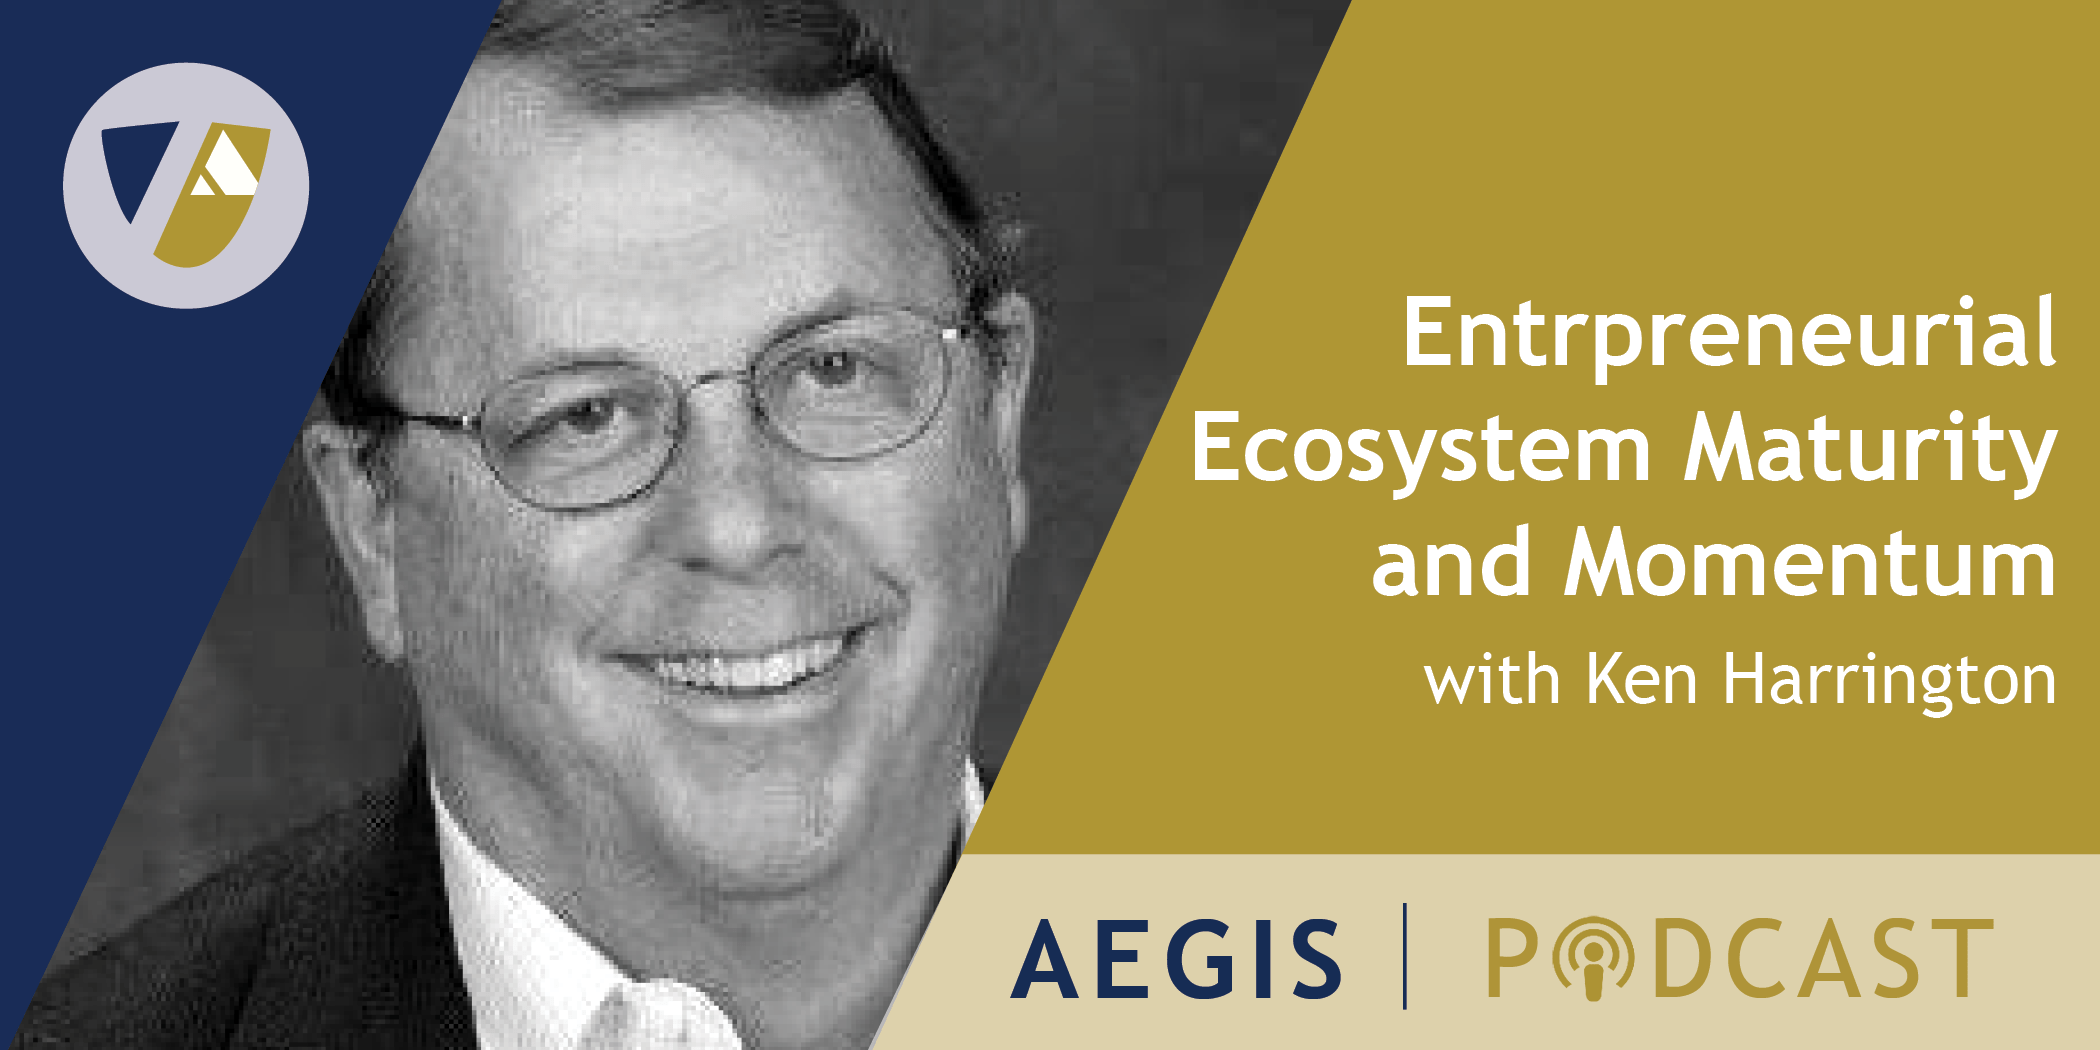 The AEGIS Podcast: Interview with Ken Harrington: Entrepreneurial Ecosystem Maturity and Momentum